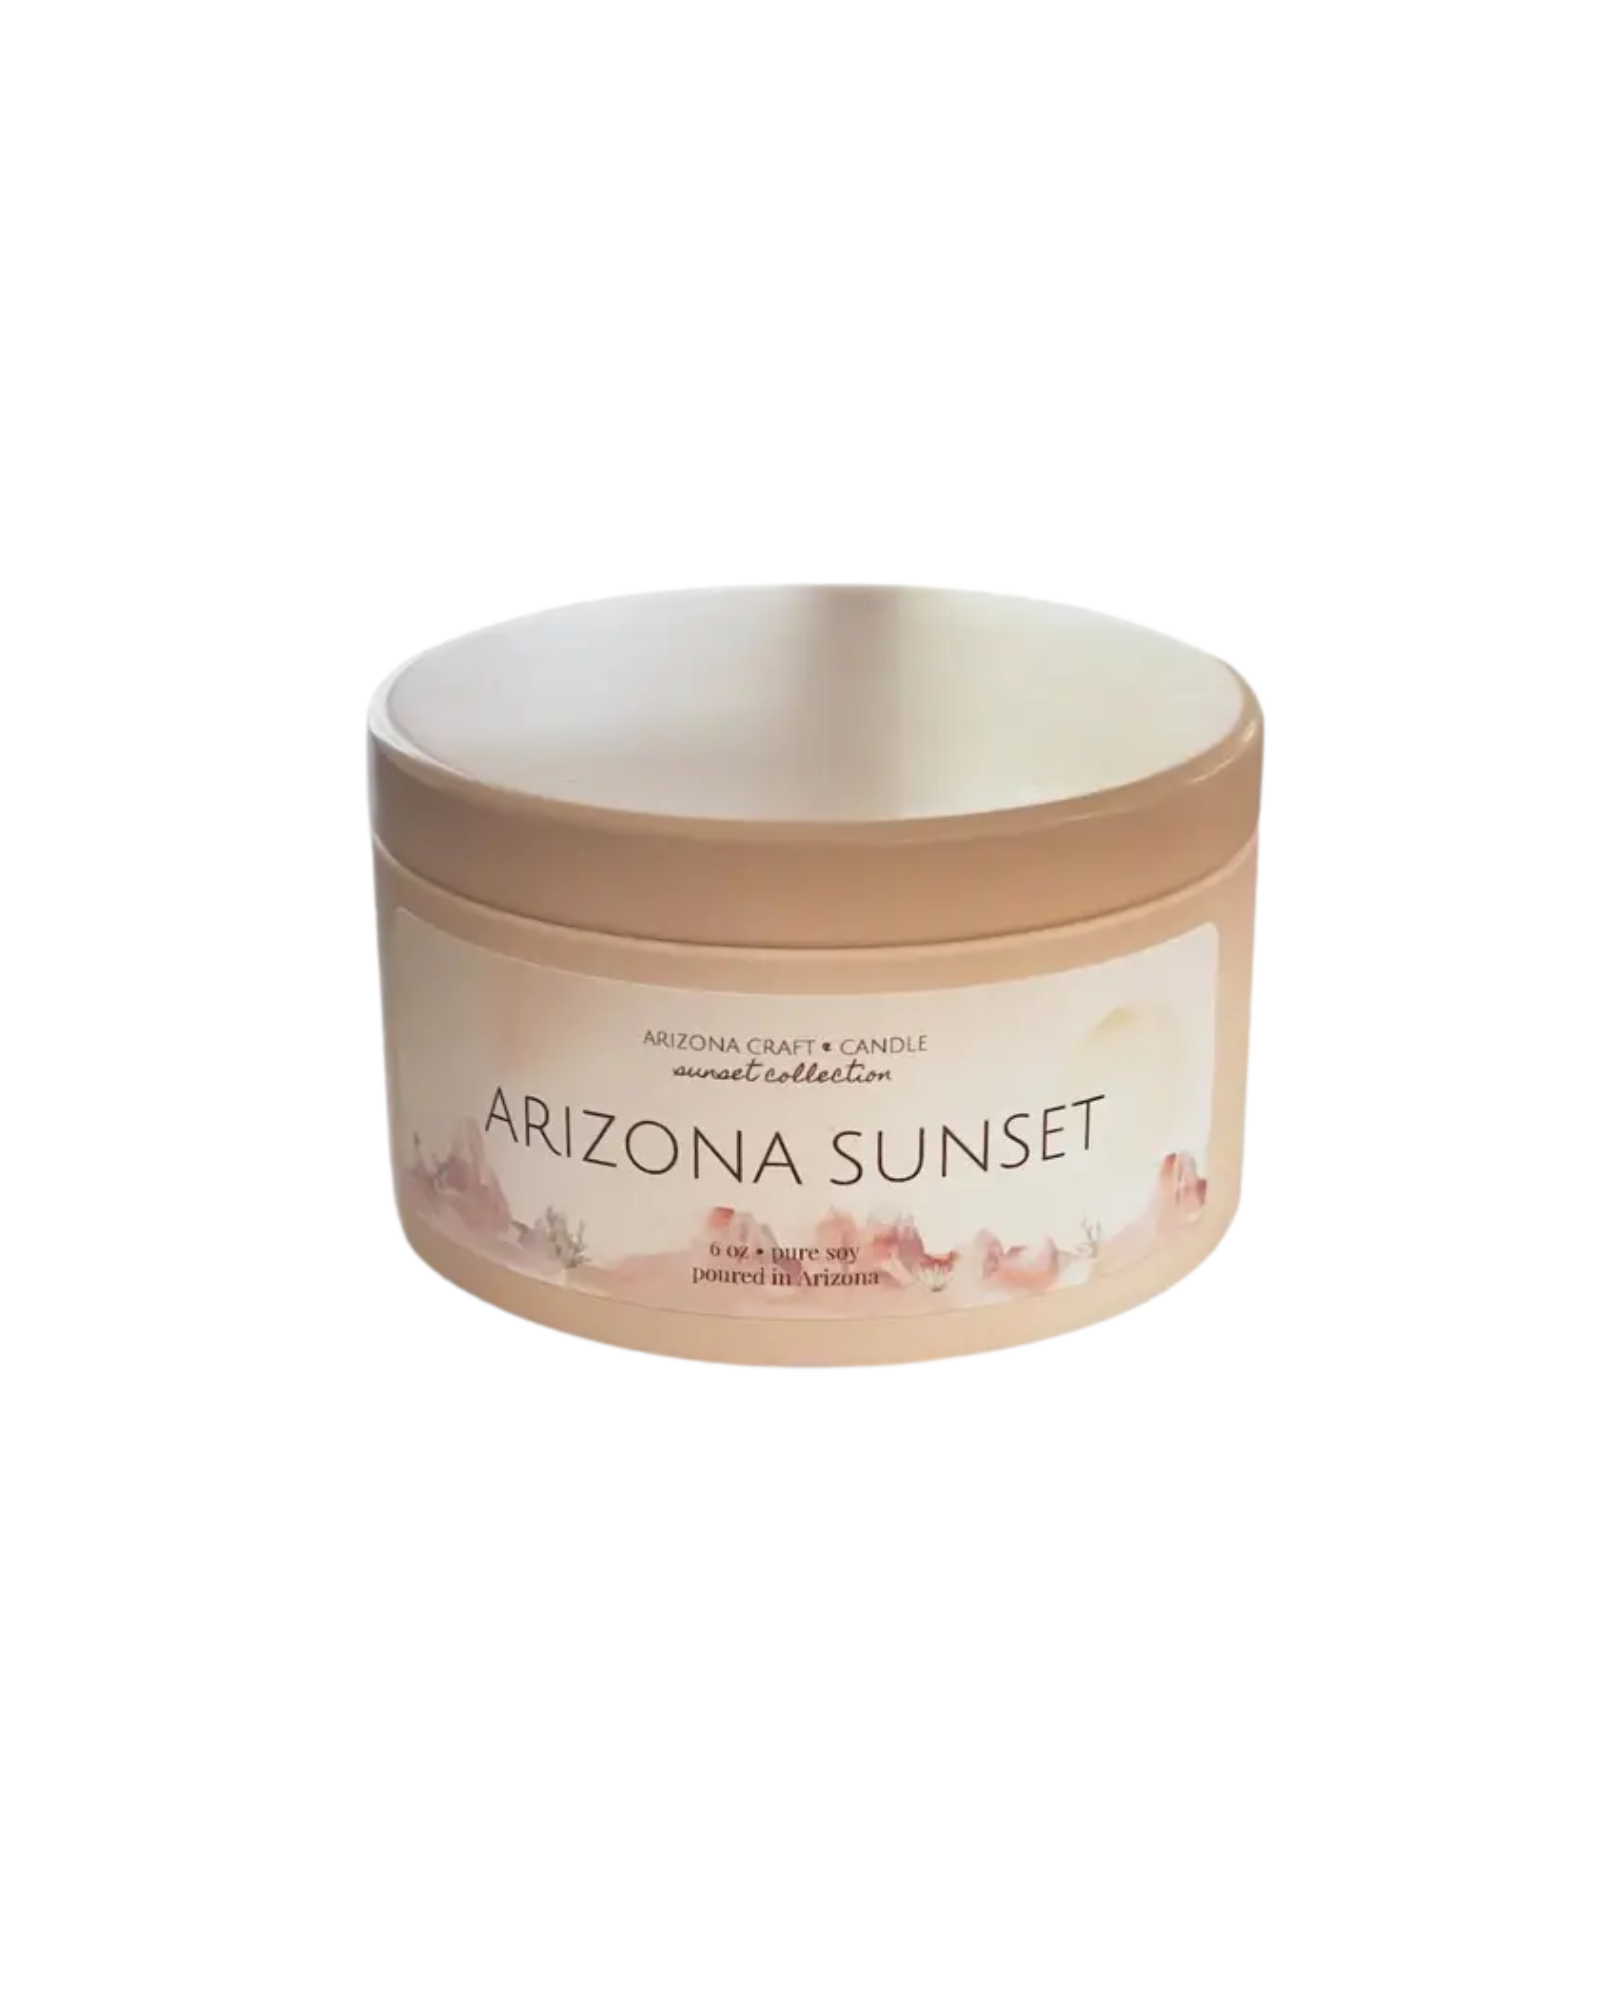 Peach colored candle tin with a label featuring a desert landscape and the words "arizona sunset" 